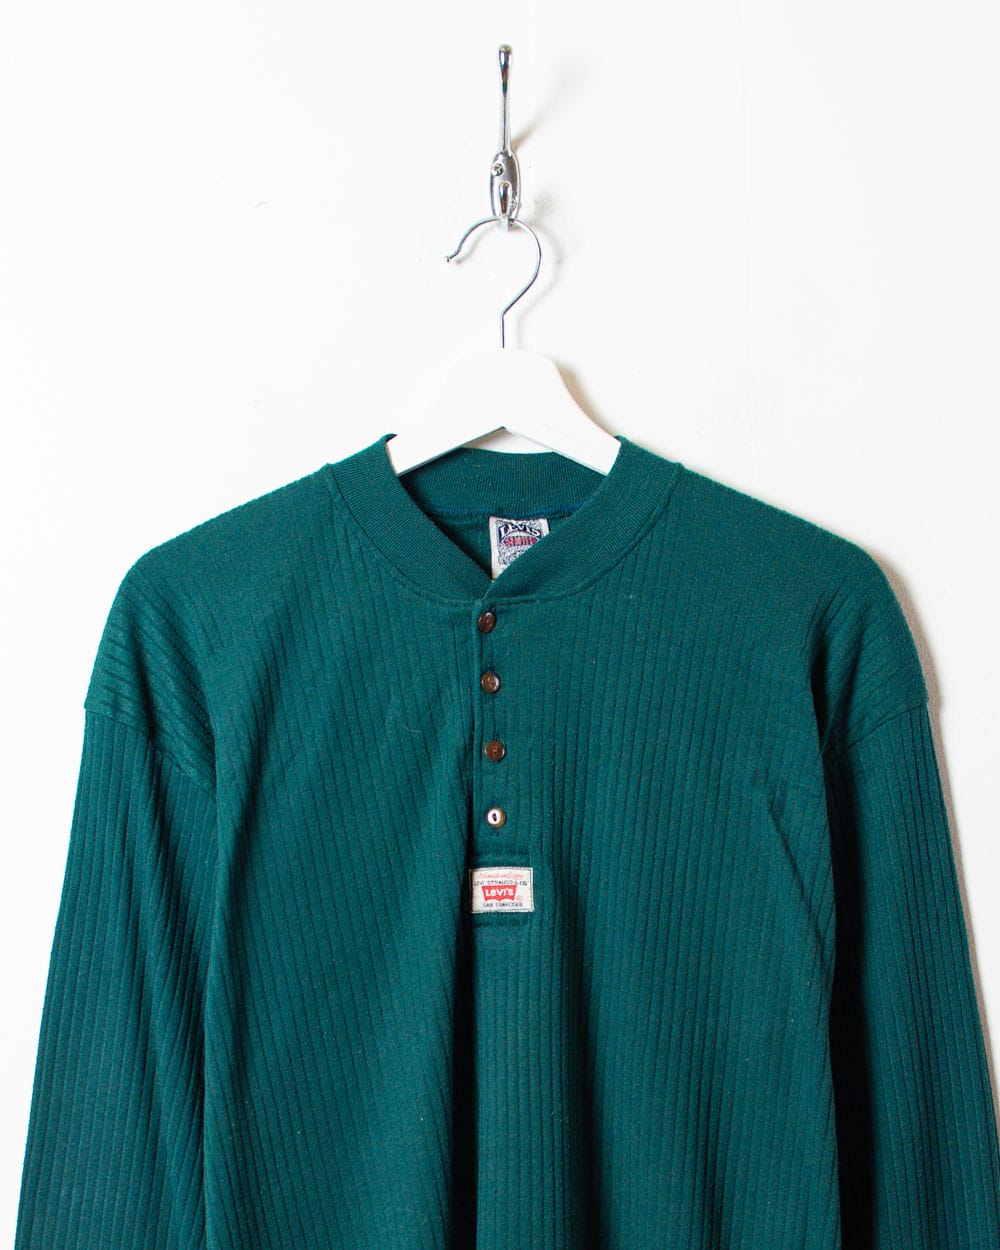 Green Levi's Textured Long Sleeved T-Shirt - Large